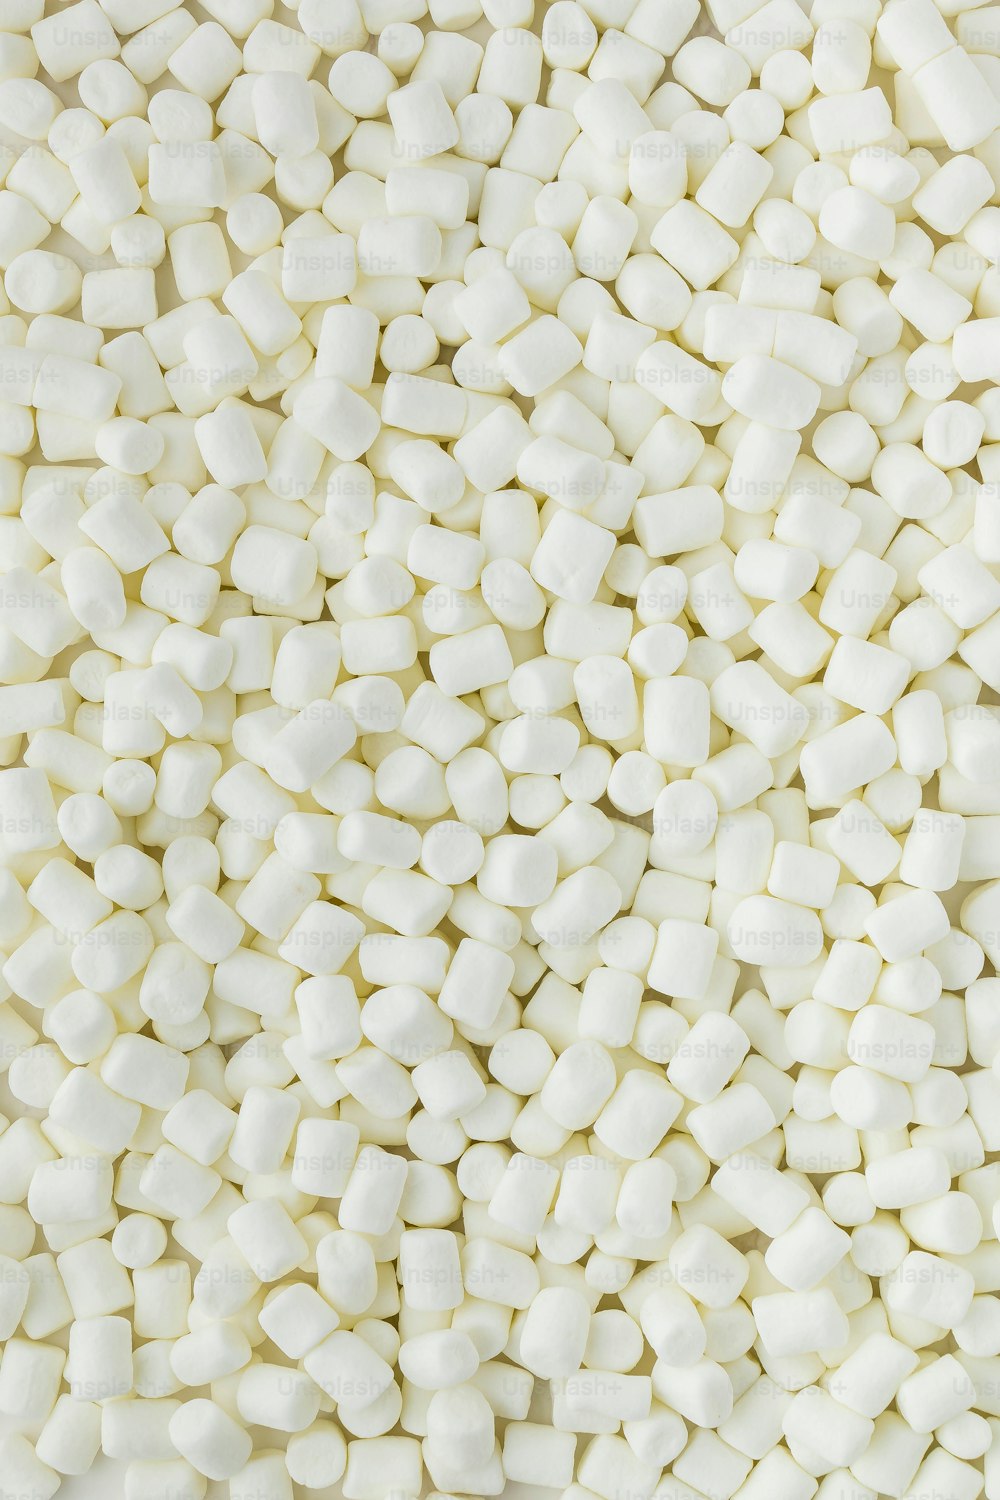 a pile of white marshmallows sitting next to each other